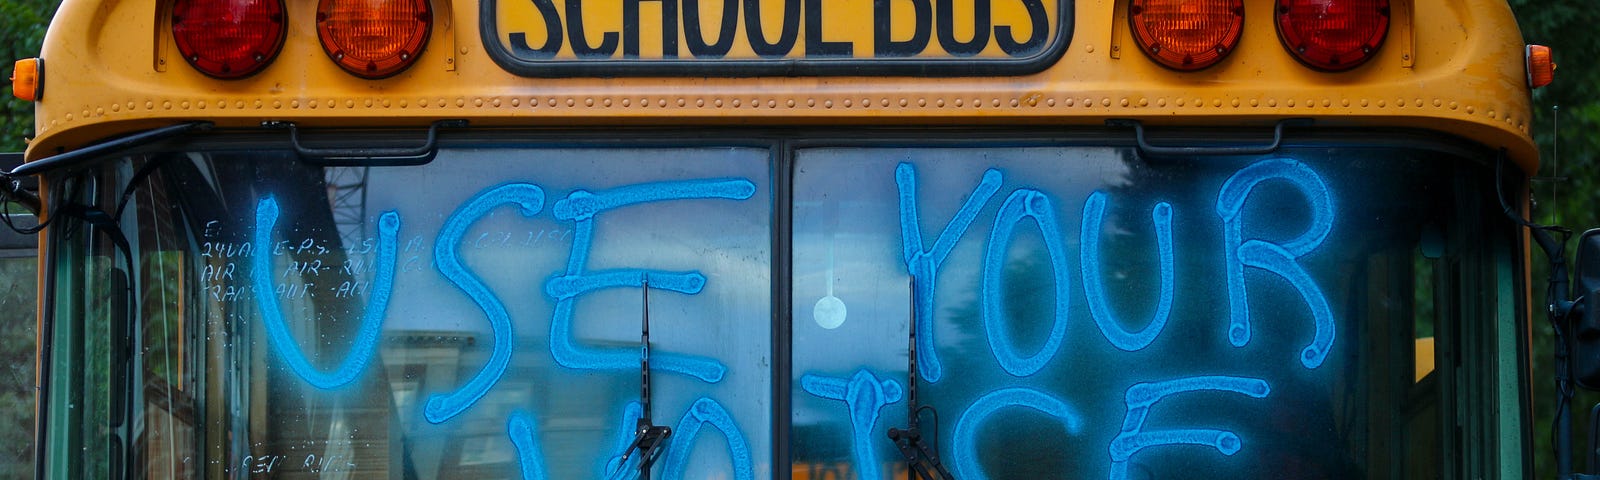 The front of a yellow school bus has the words “Use Your Voice” spray painted on the front windows.